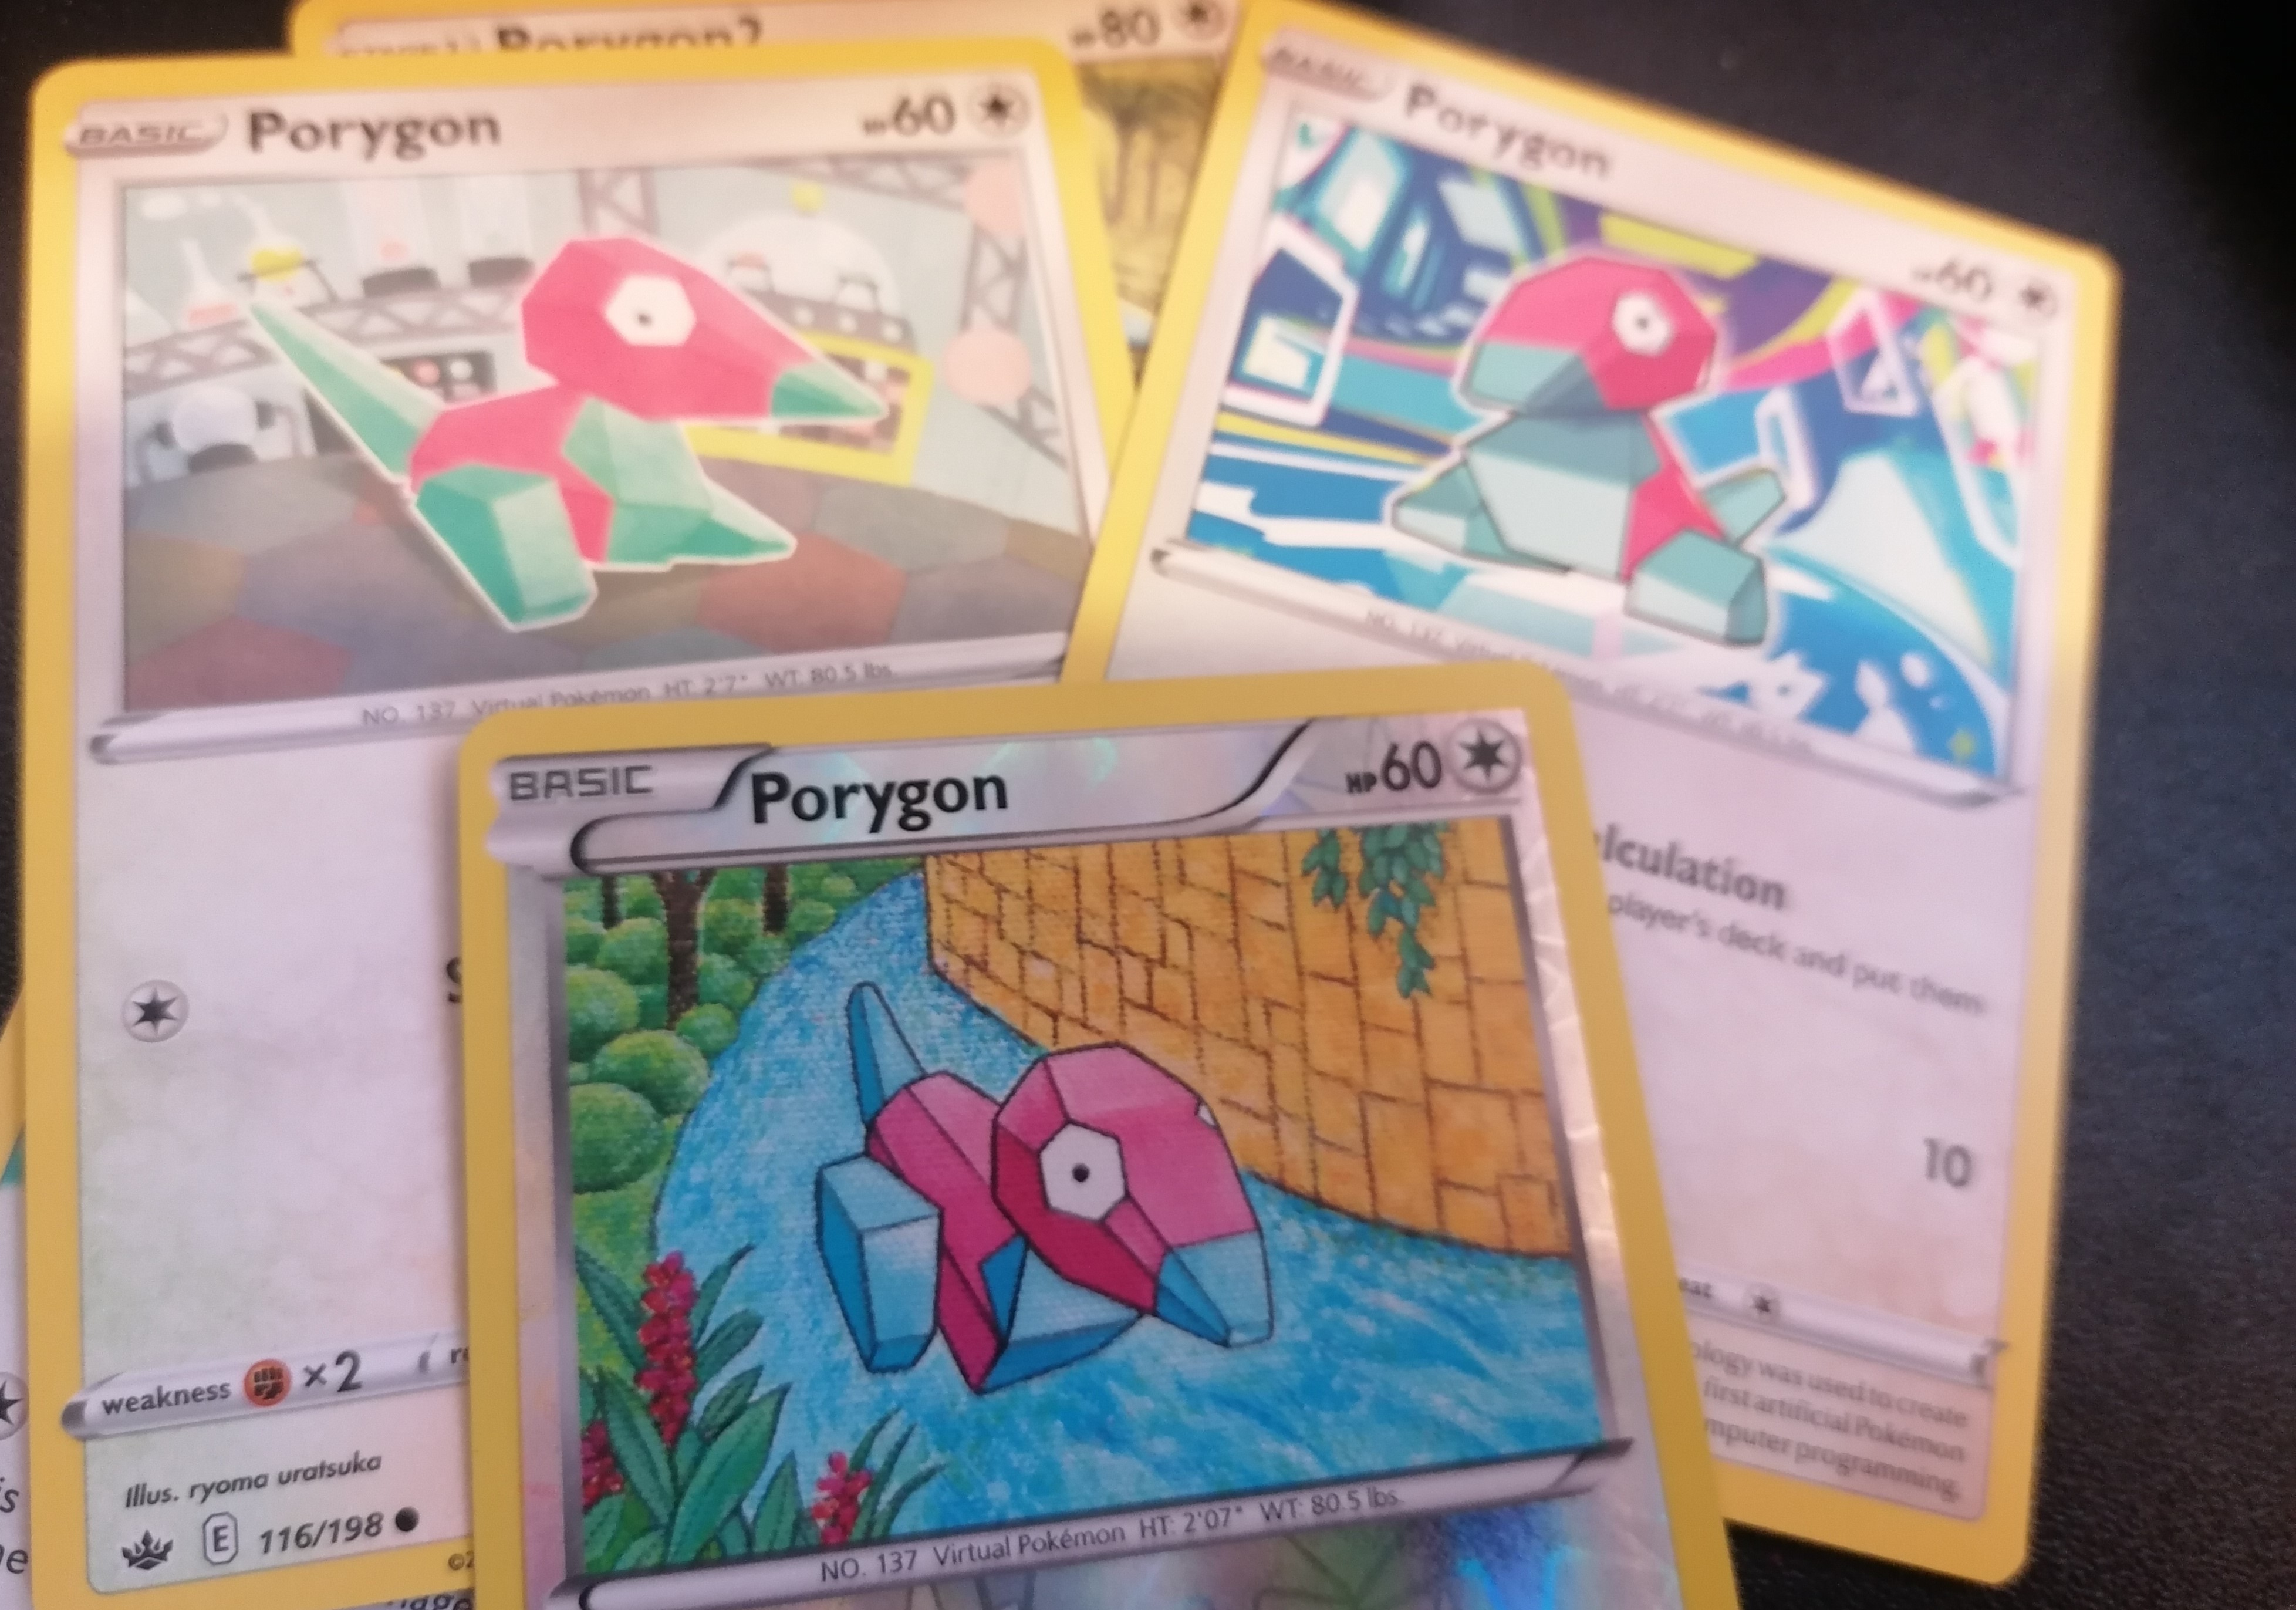 Three Porygon Pokemon cards. The images are small.